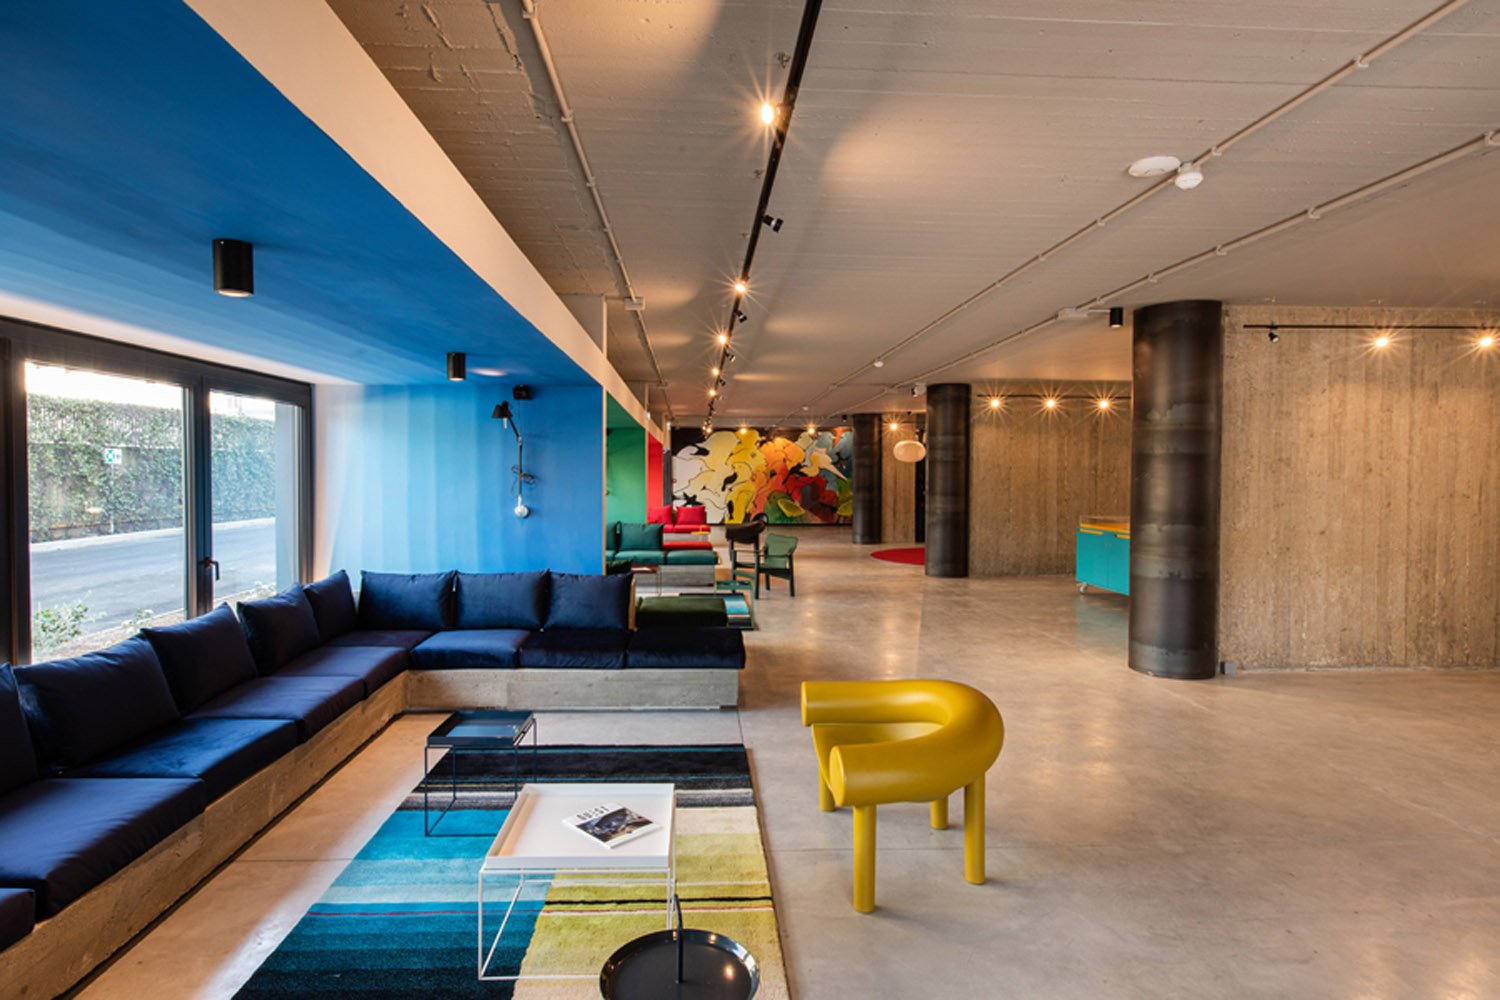 IBIS STYLES ROMA AURELIA, the entire spectrum of colors in one place